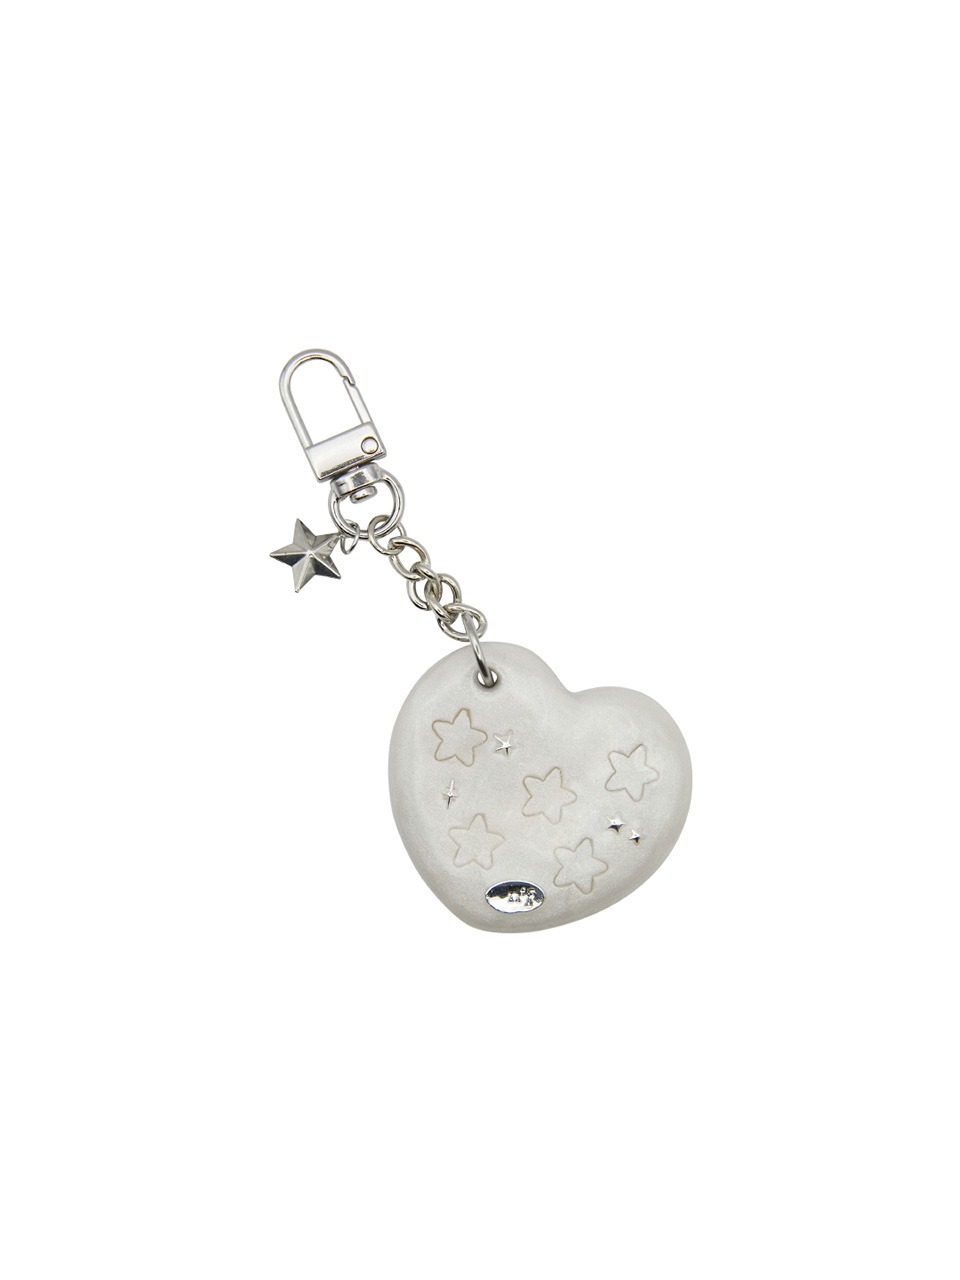 NFF - HEART STAR MIRROR KEY RING (WHITE PEARL)